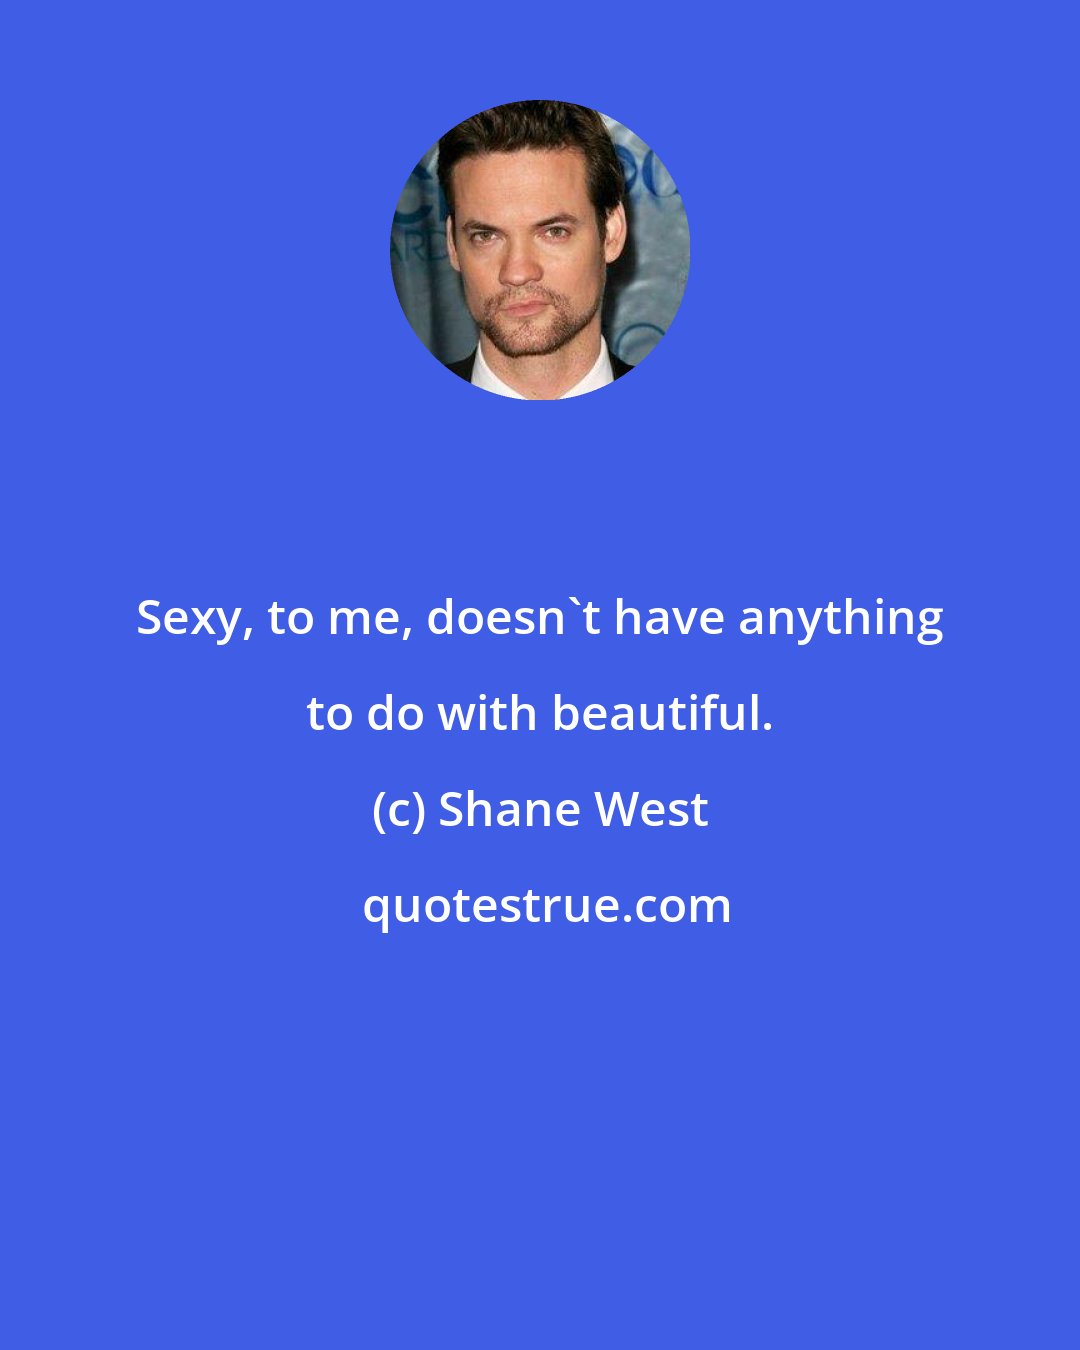 Shane West: Sexy, to me, doesn't have anything to do with beautiful.